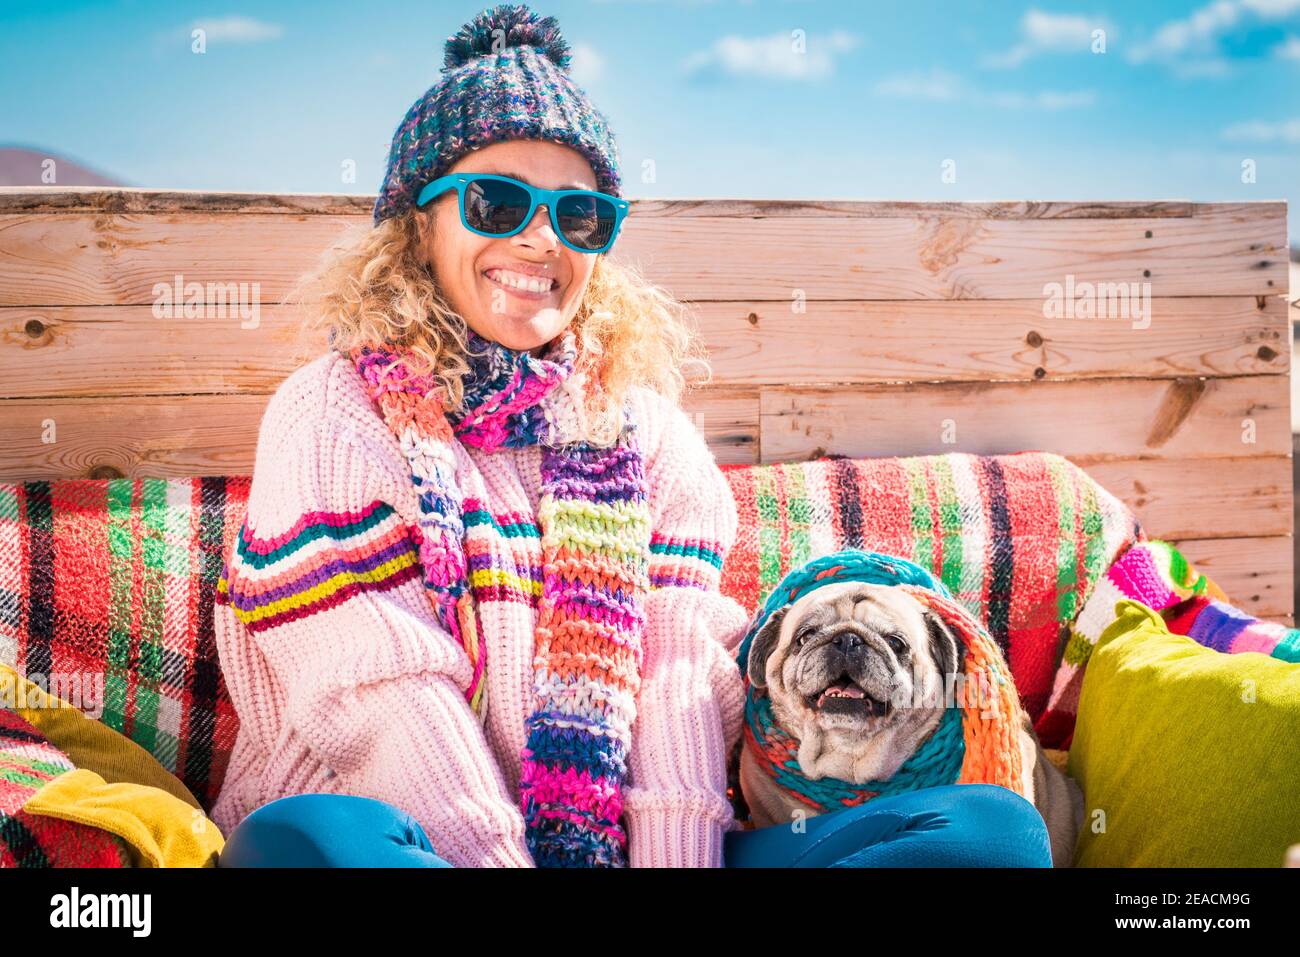 Winter and colorful happy portrait of cheerful beautiful young woman and dog sitting outdoor together - people and animals concept - blue sky in background outdoor activity with animals Stock Photo